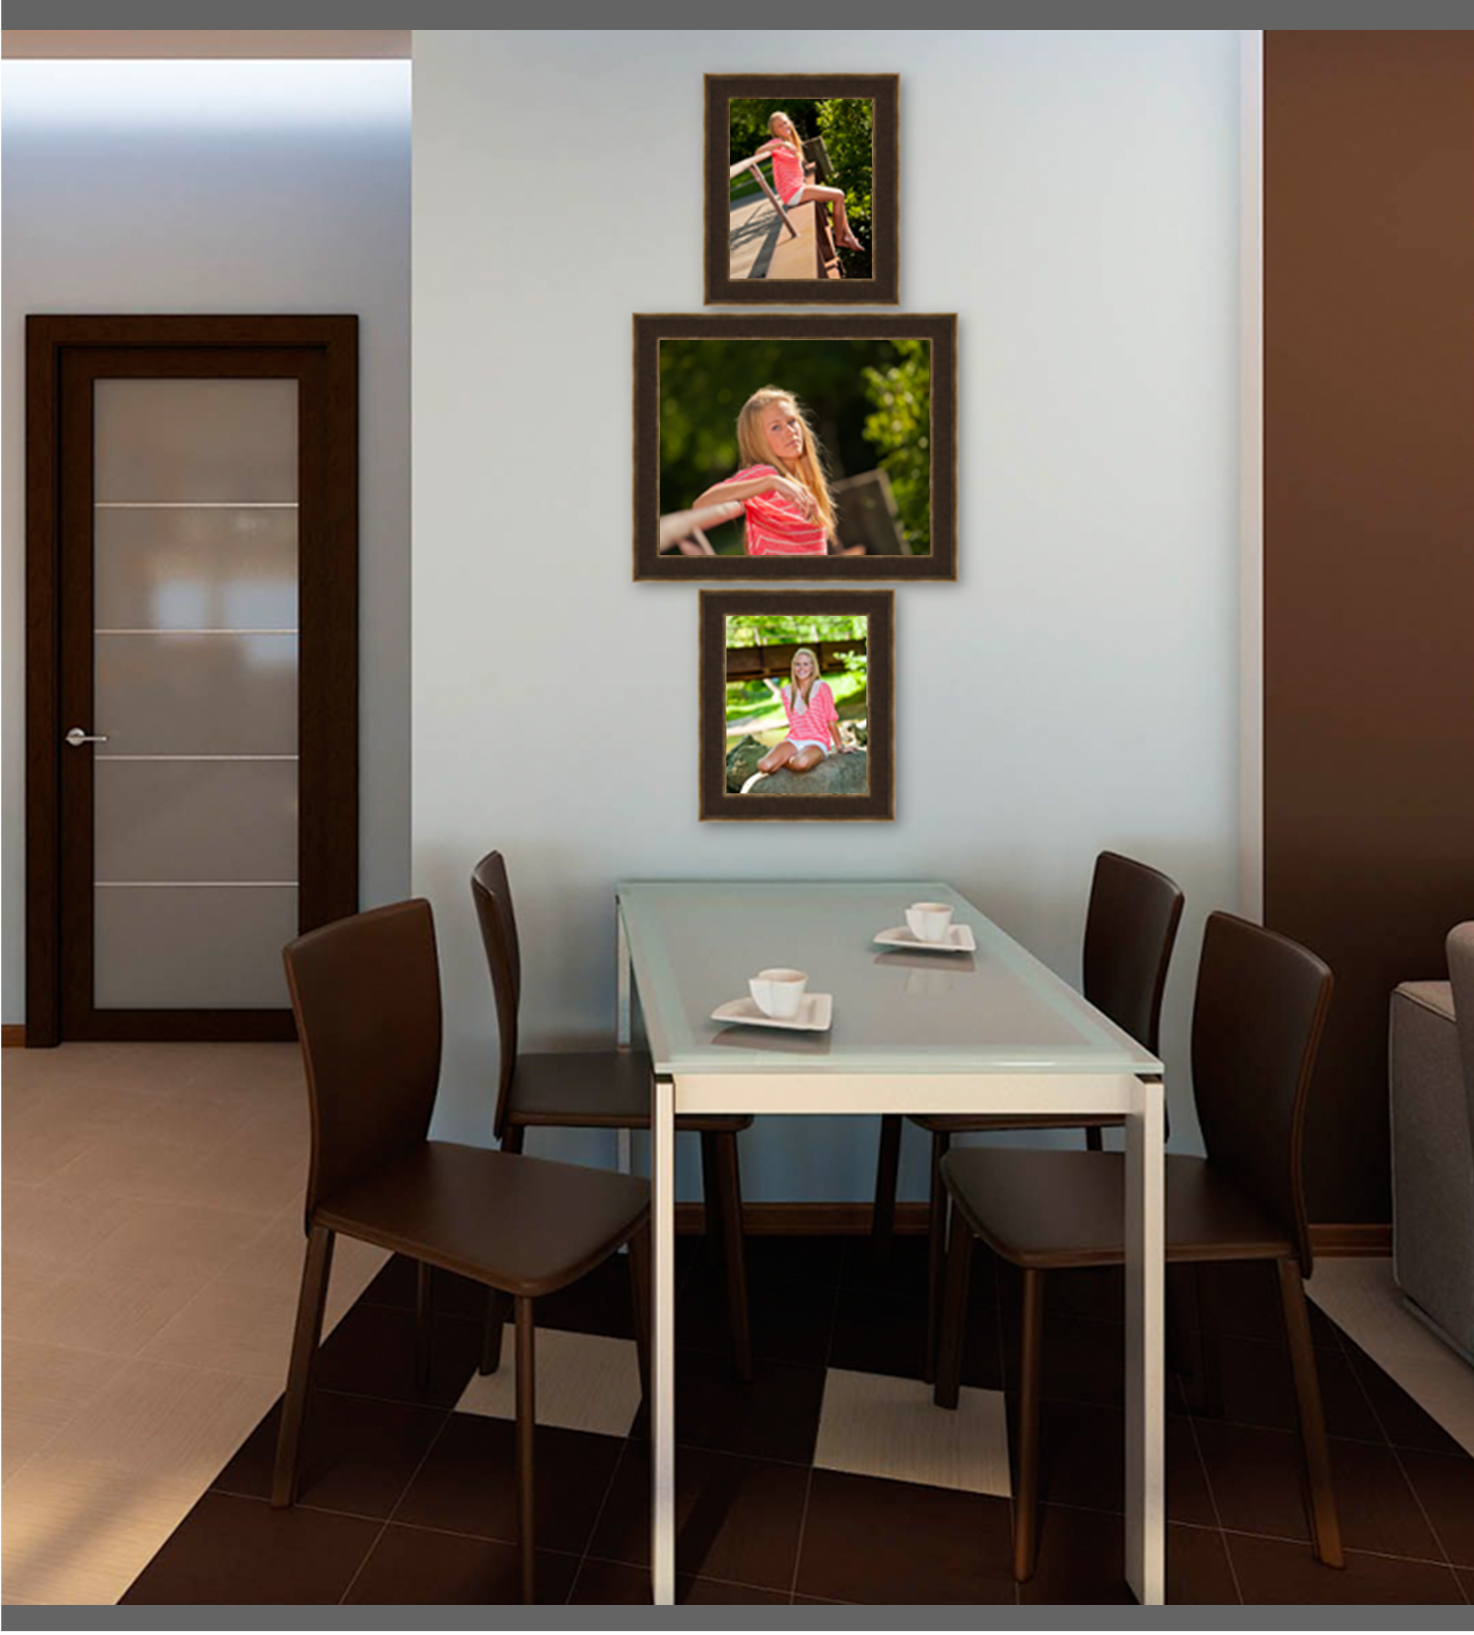 Our projection Sales System lets you see your pictures in your house so you can be sure they are going to look just right